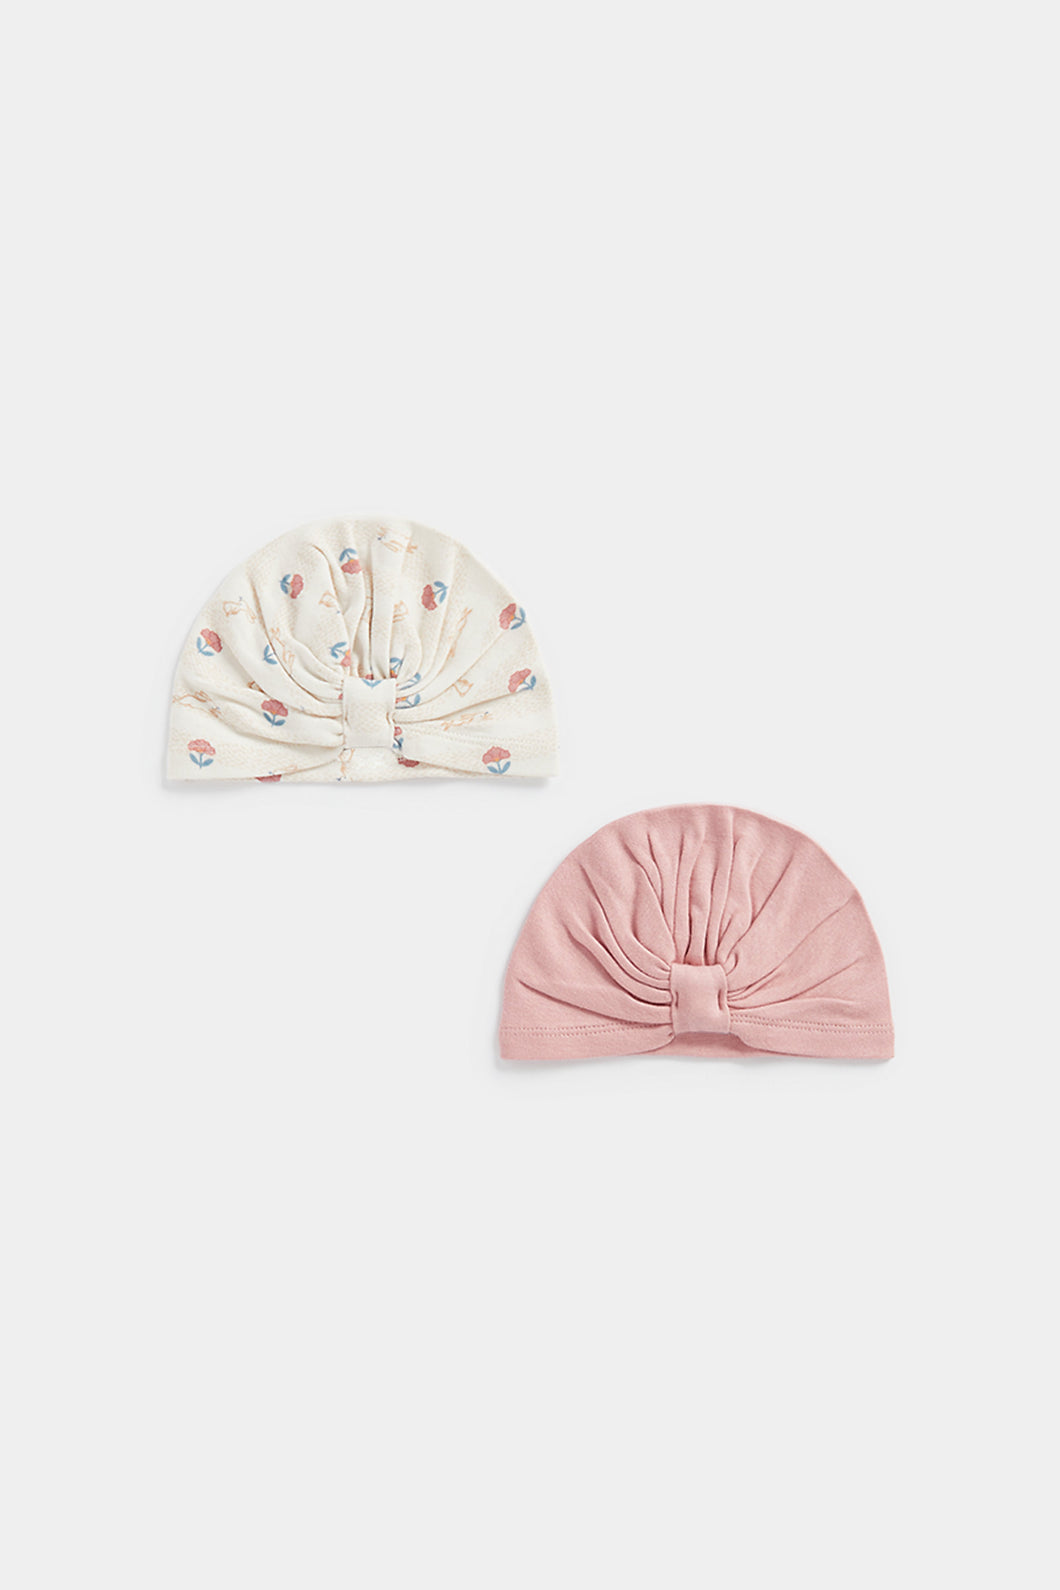 Mothercare Pink Bunny Baby Hats - 2 Pack